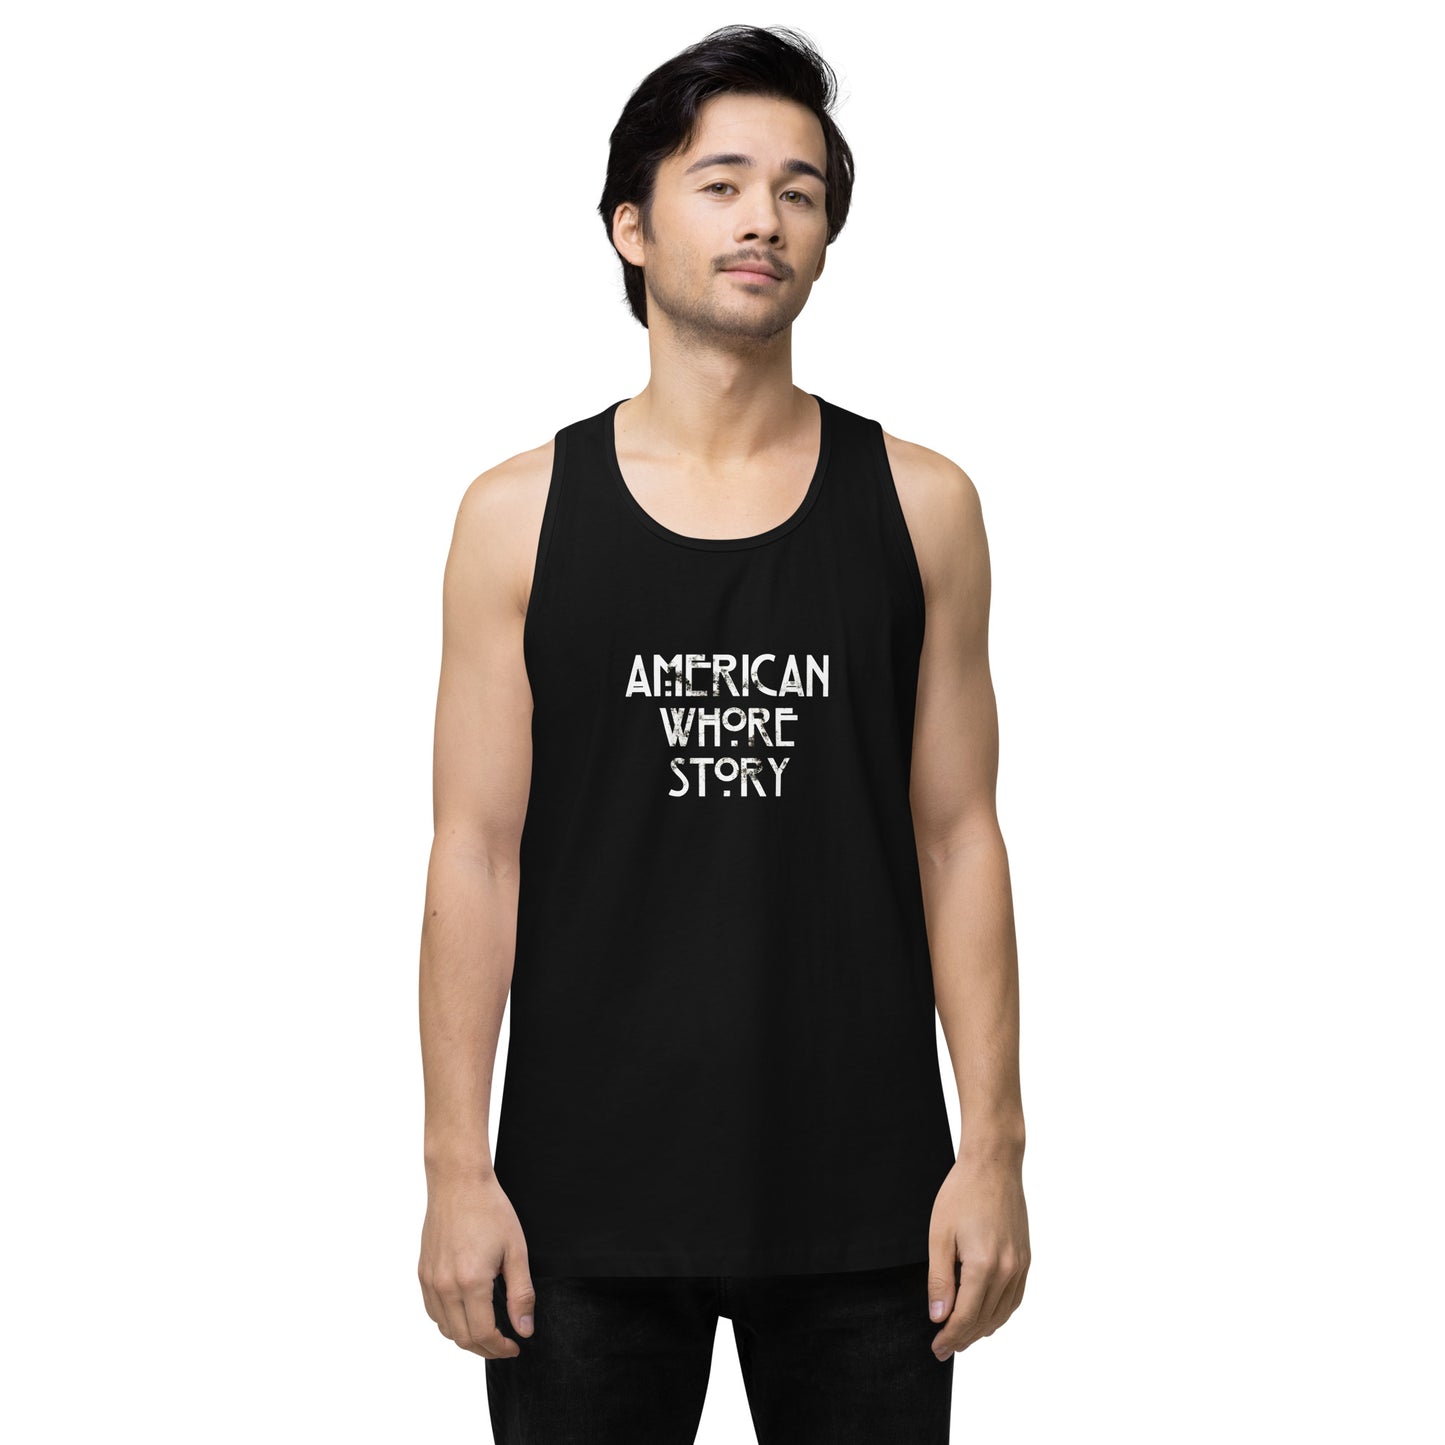 Unisex premium tank top by Moody Booty Apparel featuring 'American Whore Story' distressed white lettering. Trendy LGBTQ-themed graphic shirt with irreverent humor, perfect for gay, queer, and LGBTQ individuals. Celebrate pride and make a statement with this fashionable piece.